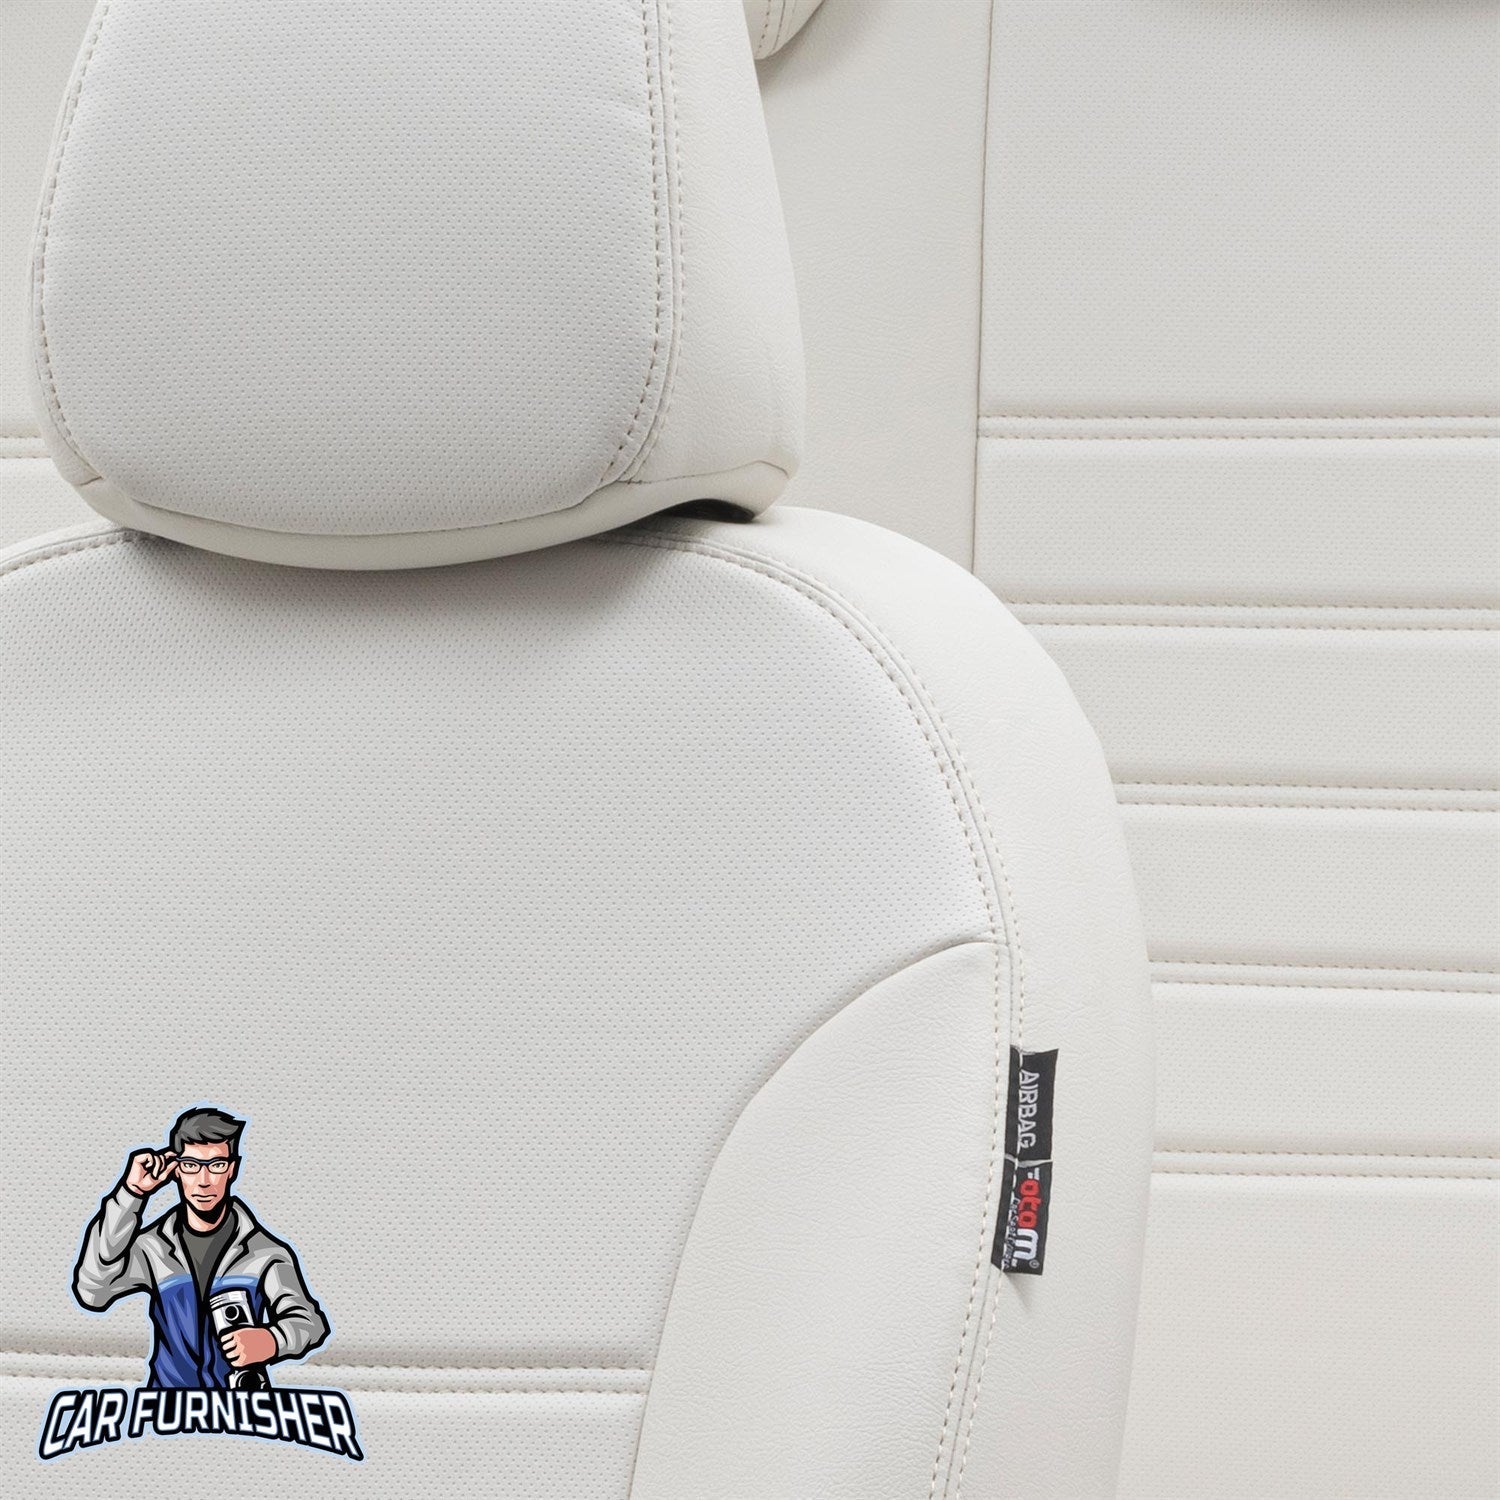 Renault Kangoo Seat Covers Istanbul Leather Design Ivory Leather